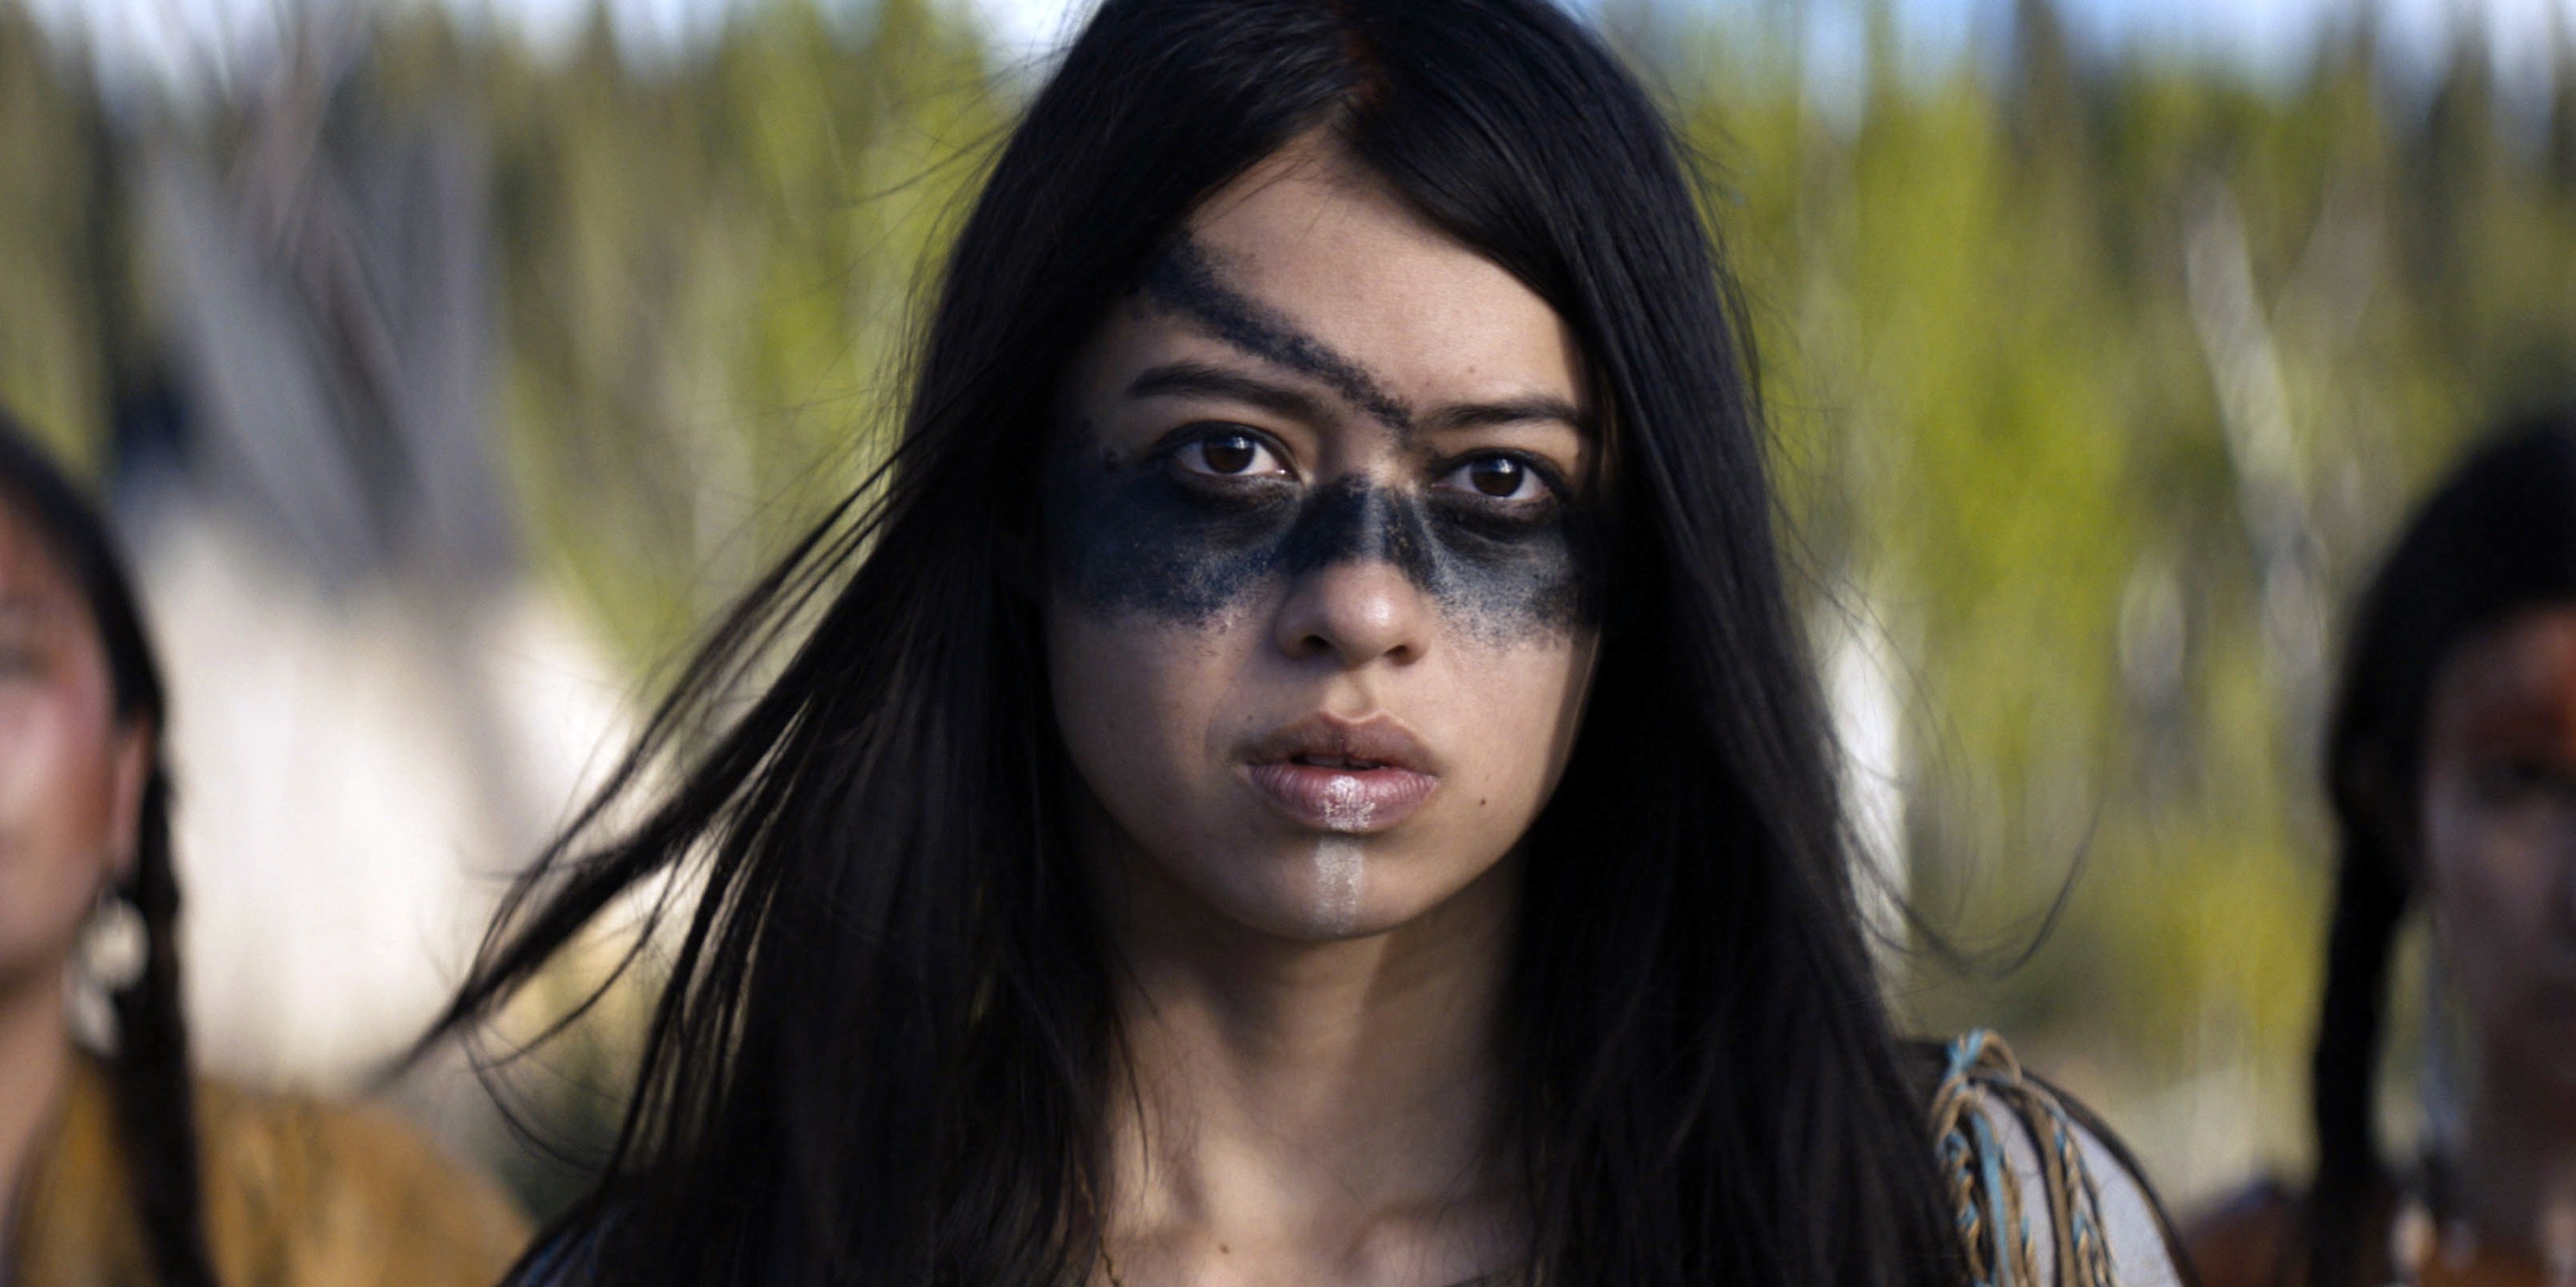 A woman in face paint stares off into the distance